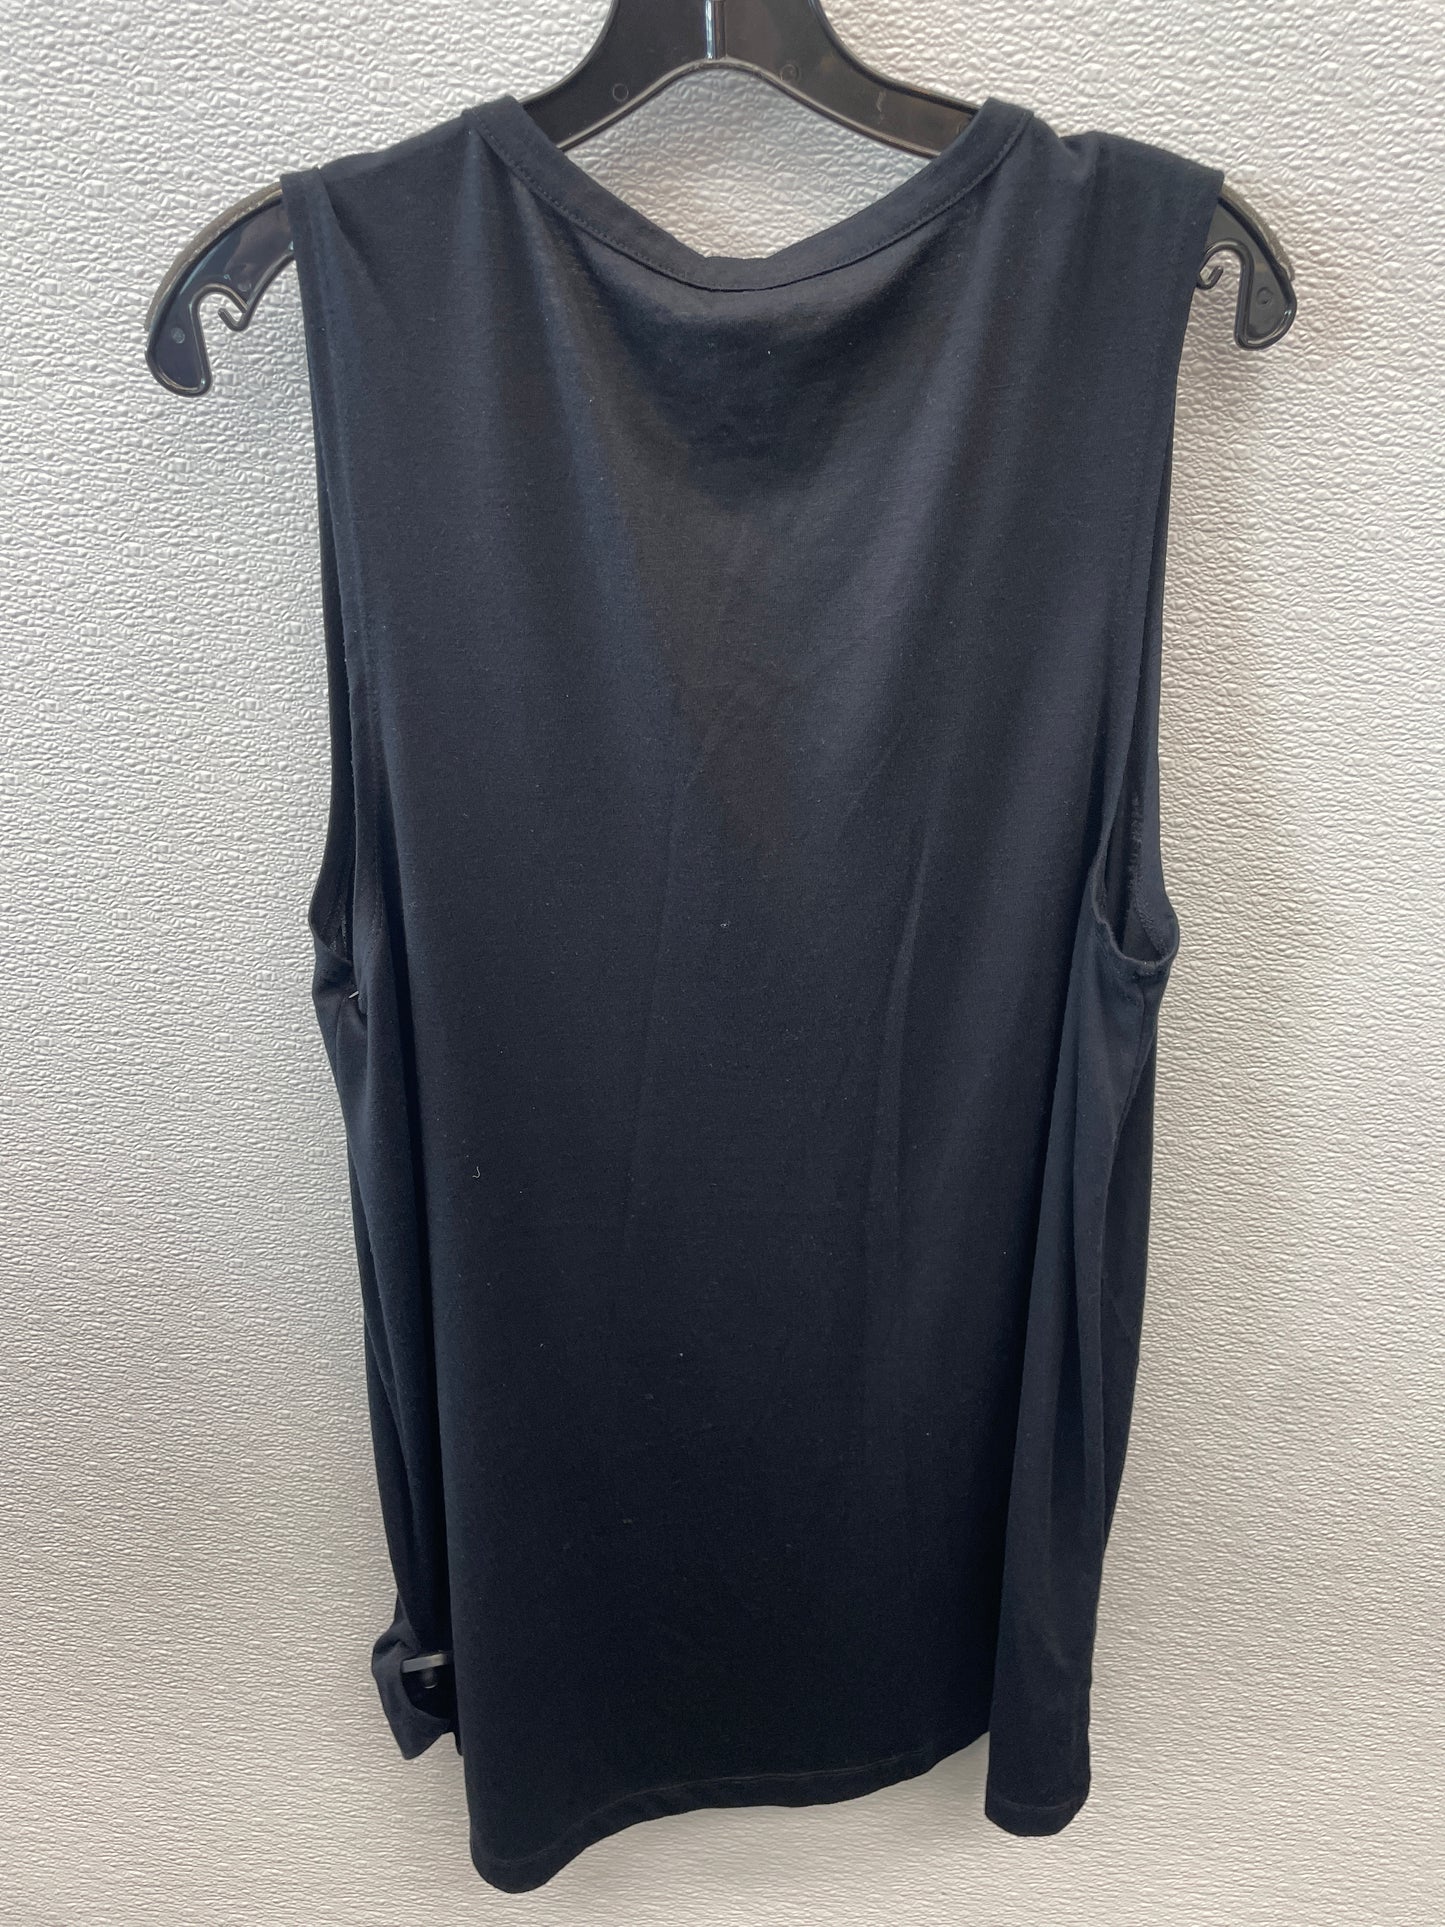 Top Sleeveless By No Boundaries  Size: 1x